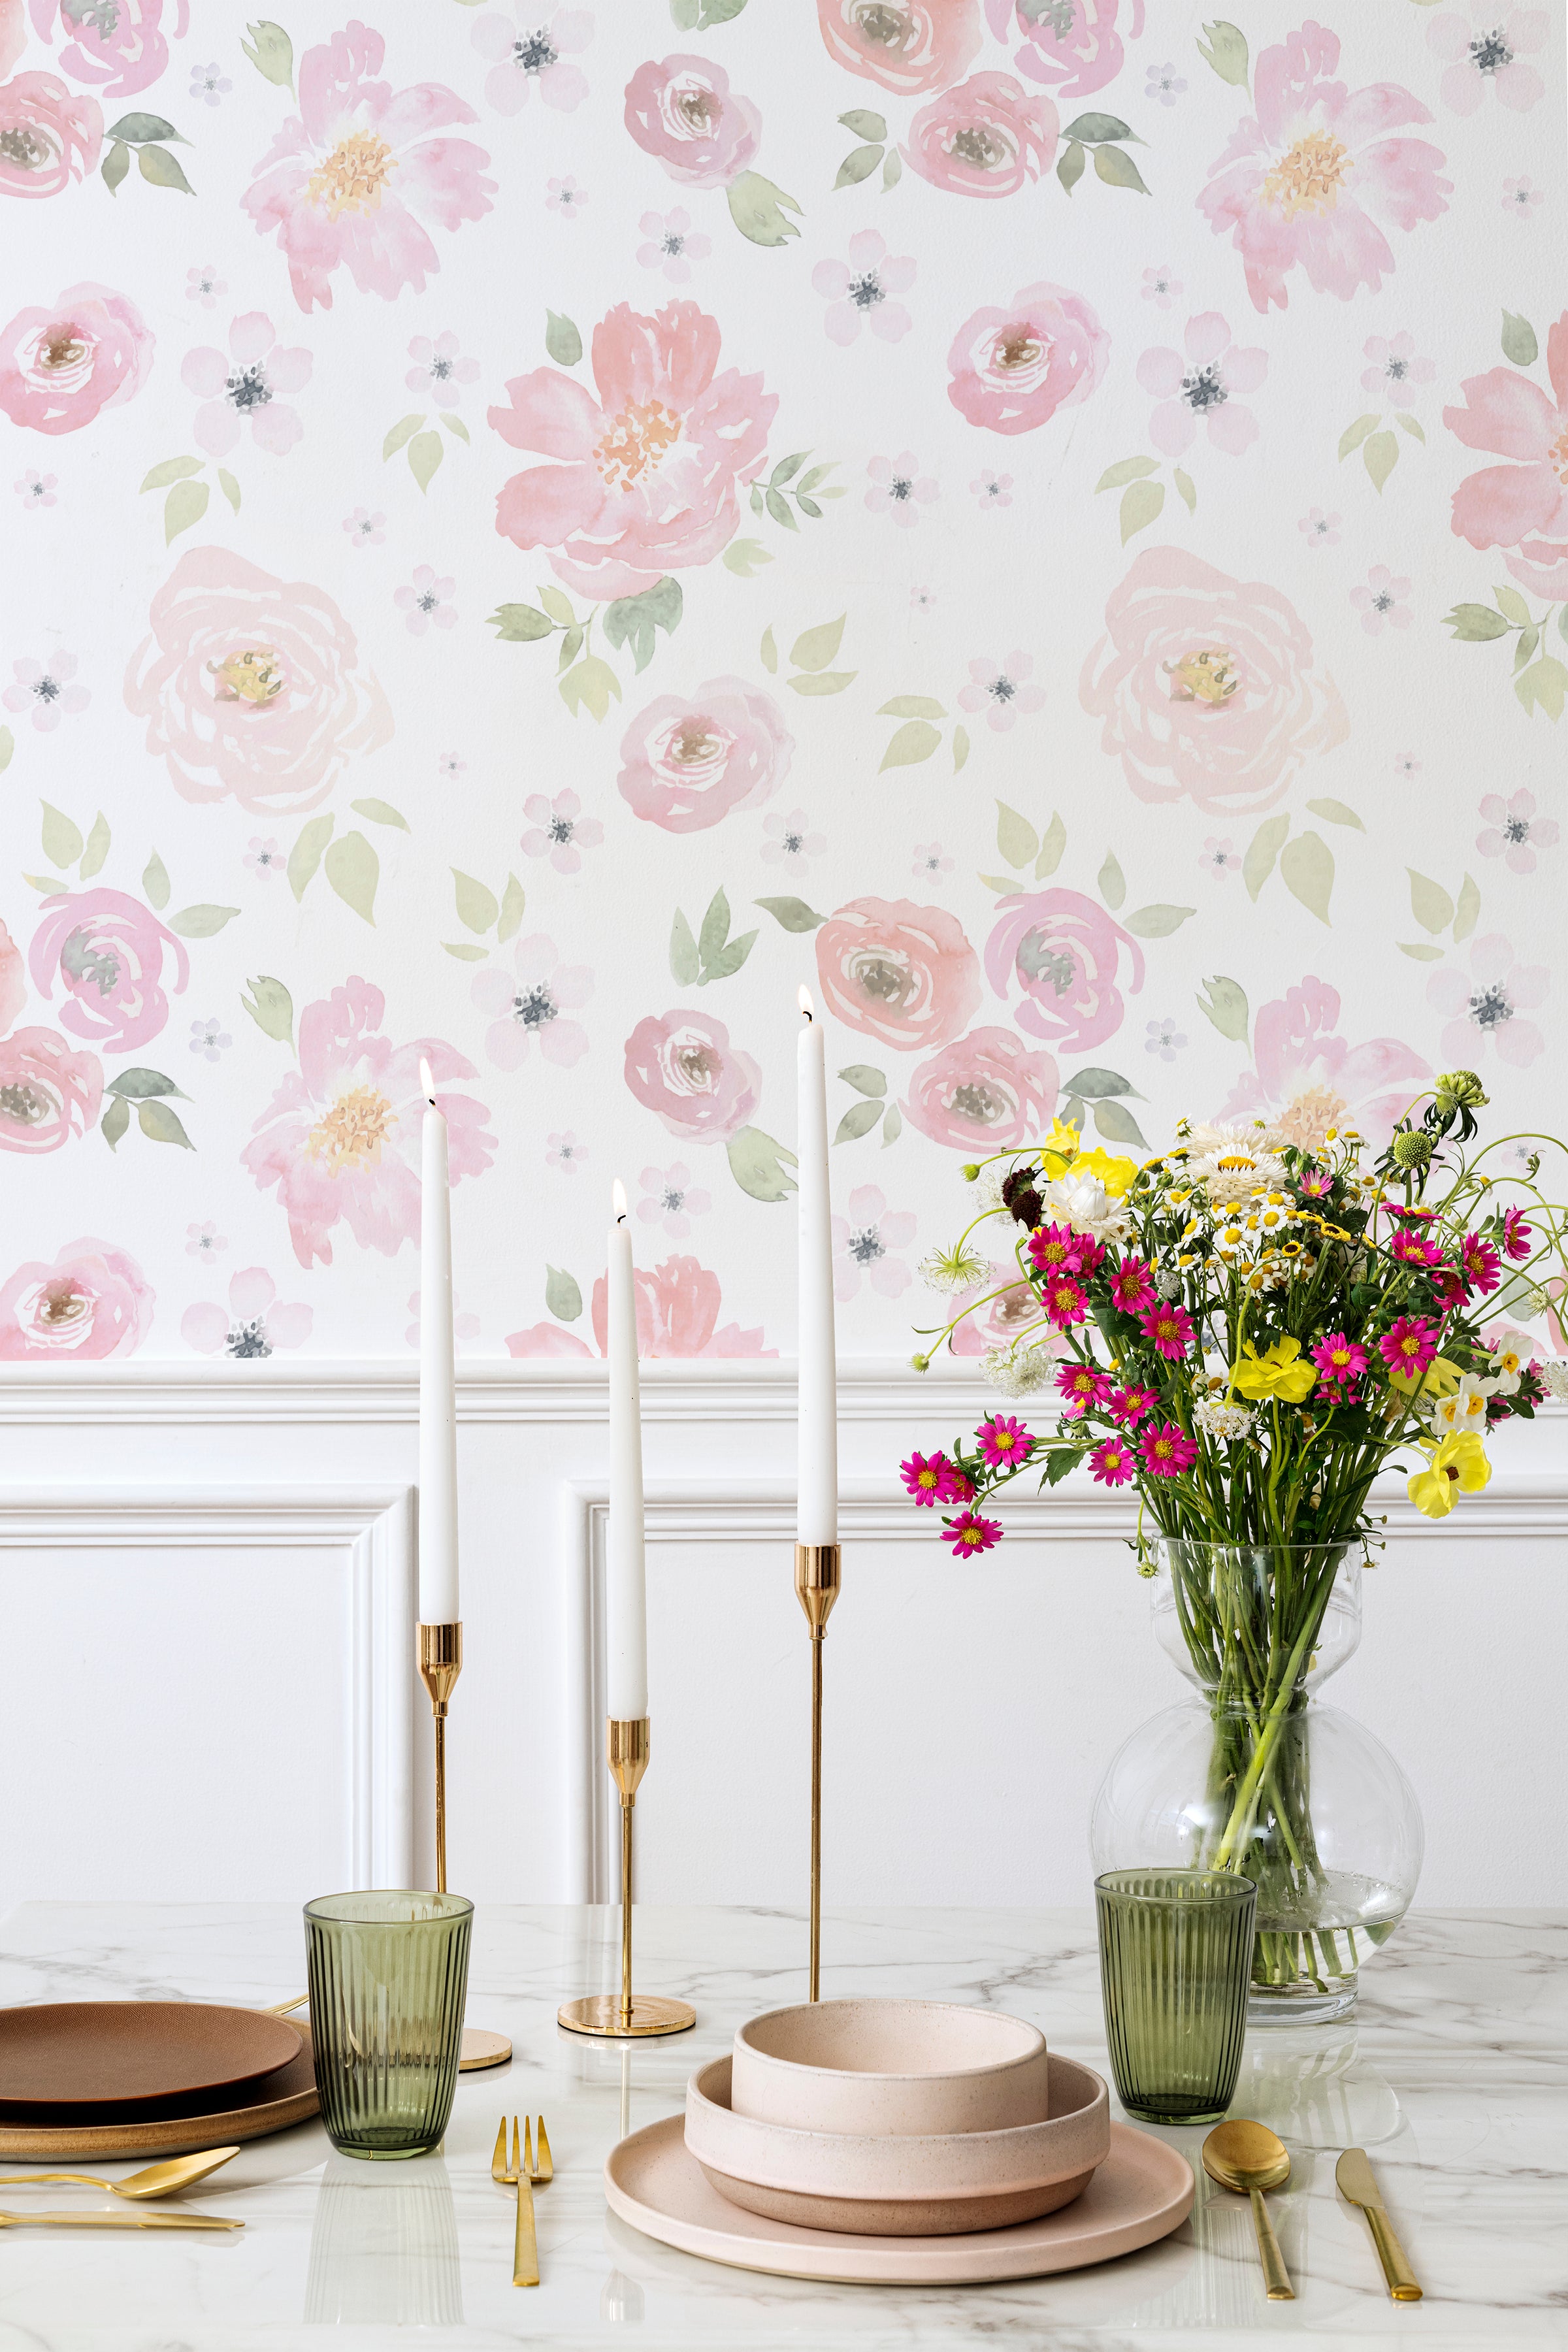 A close-up view of the Gentle Blossom Wallpaper - 25", displaying a delicate watercolor design of large pink and peach flowers with light green foliage. The soft pastel colors and floral arrangement provide a peaceful and elegant look, suitable for enhancing the beauty of any room.